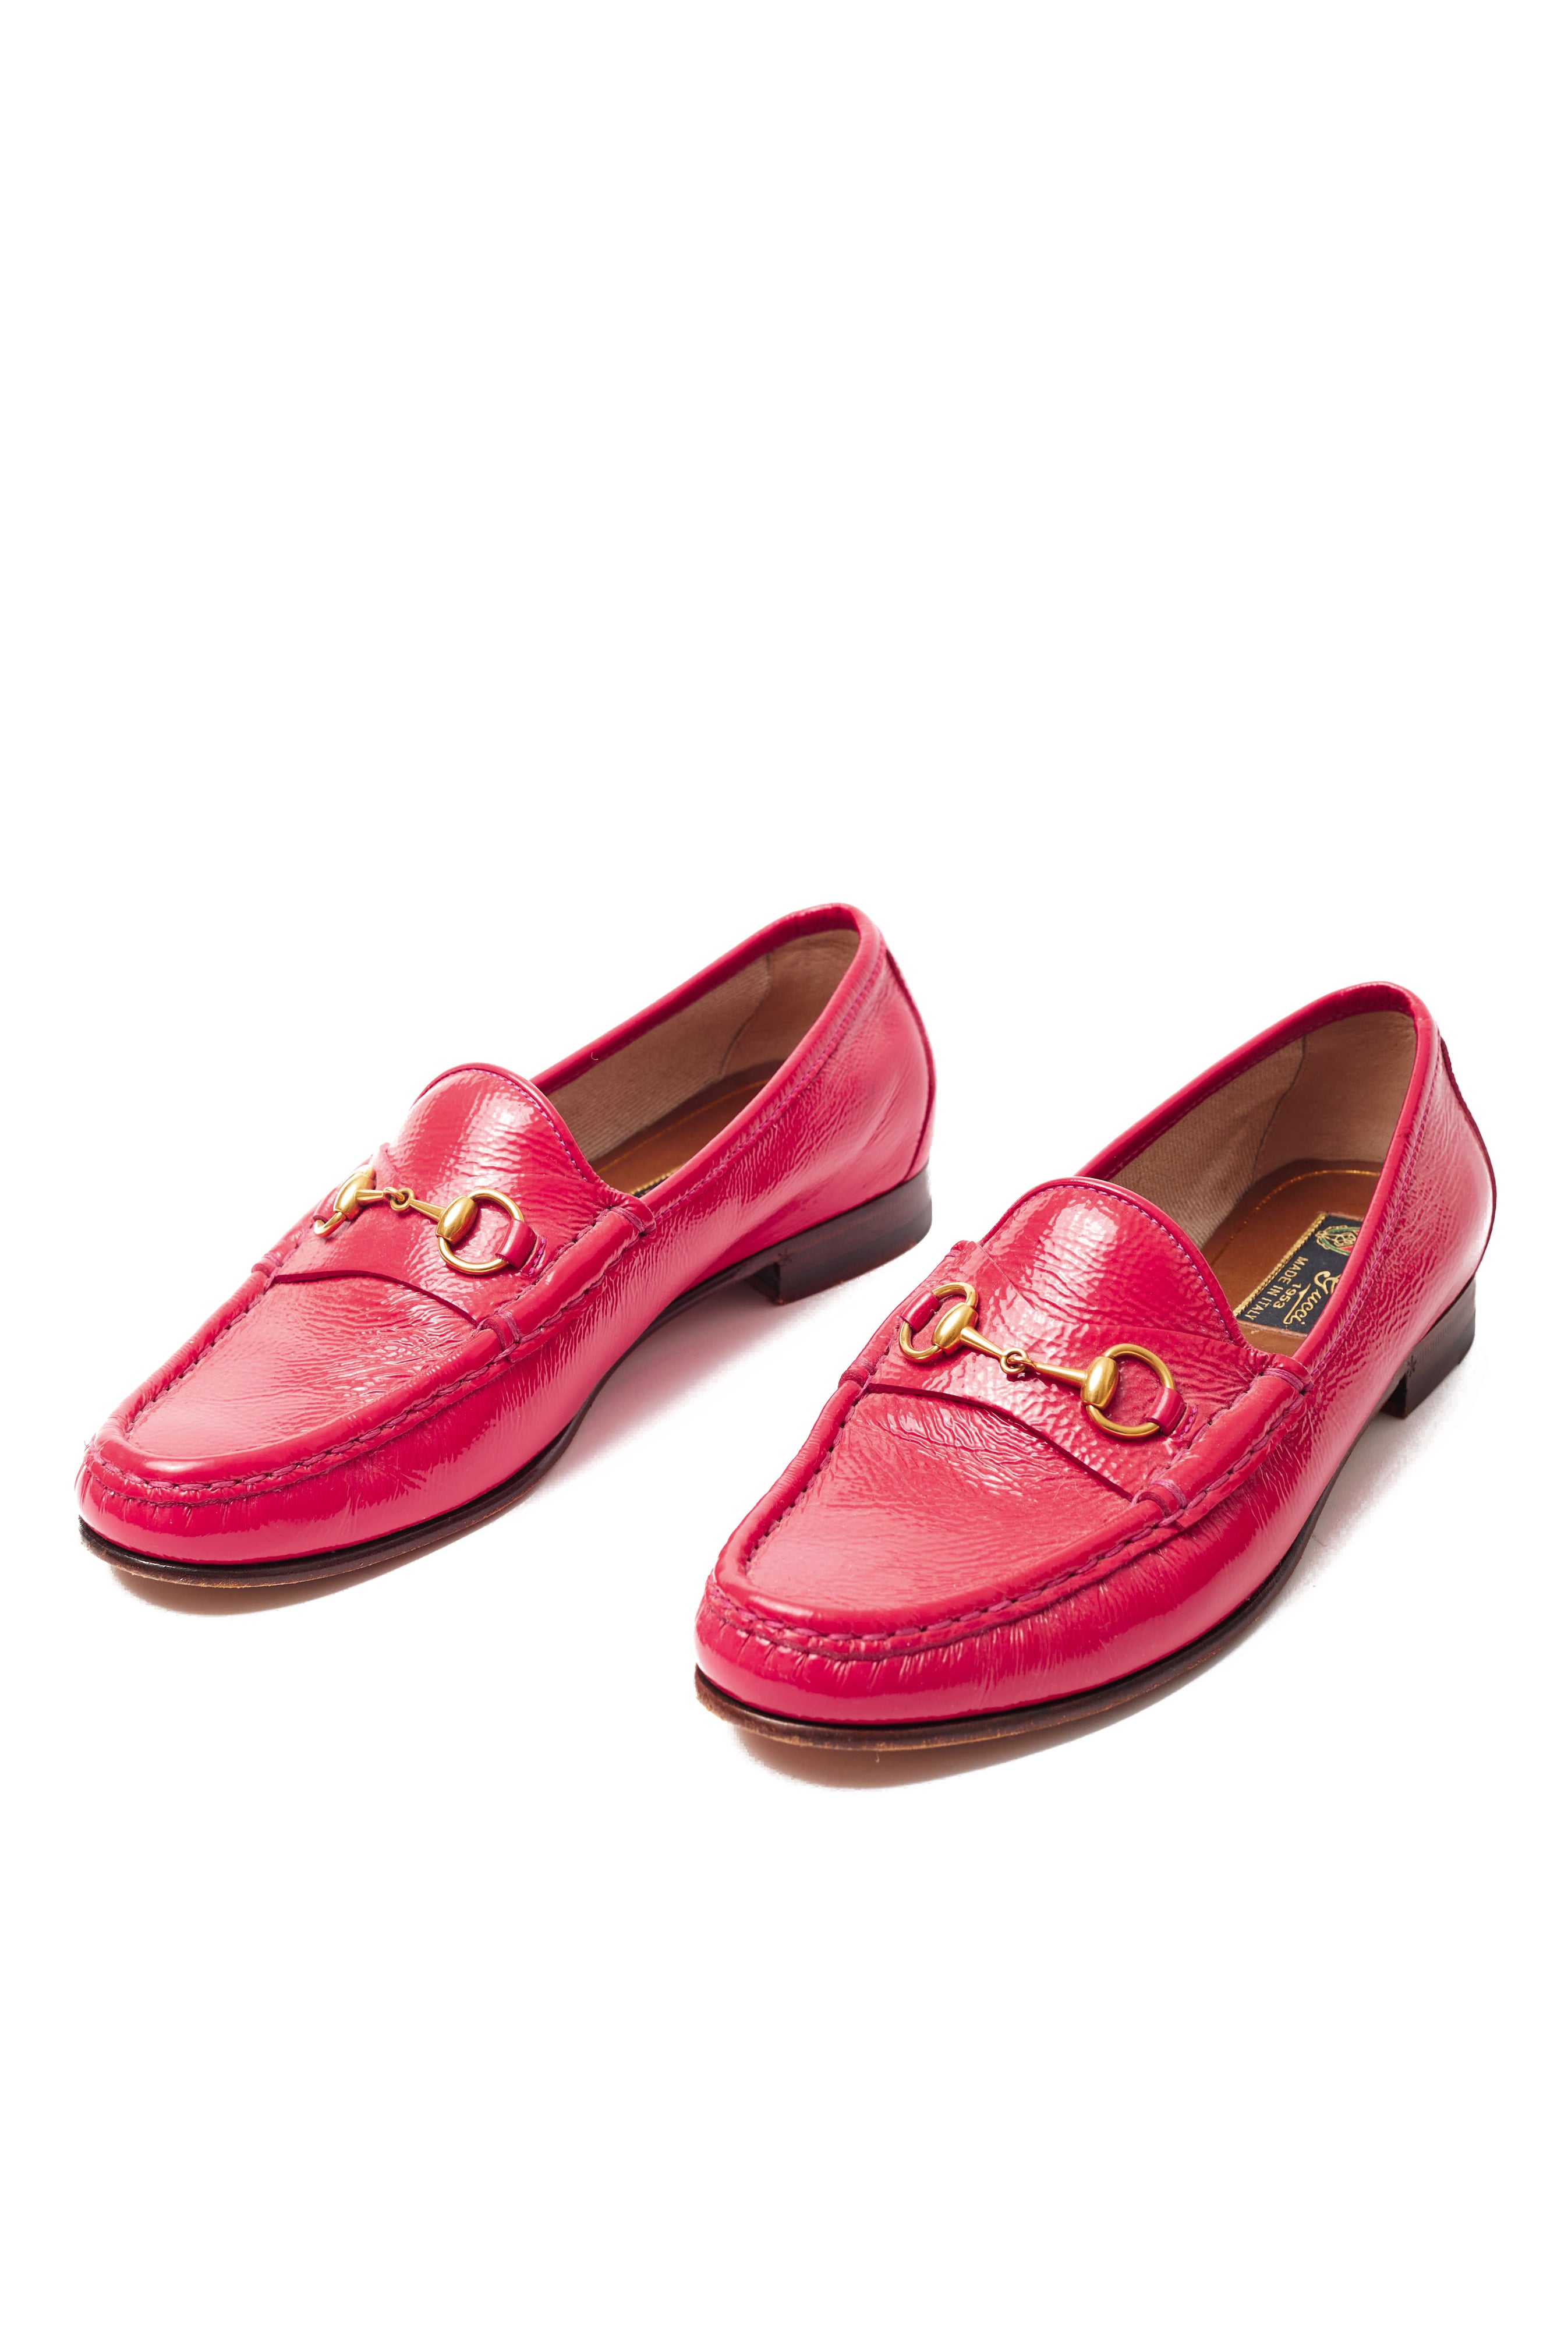 Gucci <br> 1953 patent leather horsebit loafer